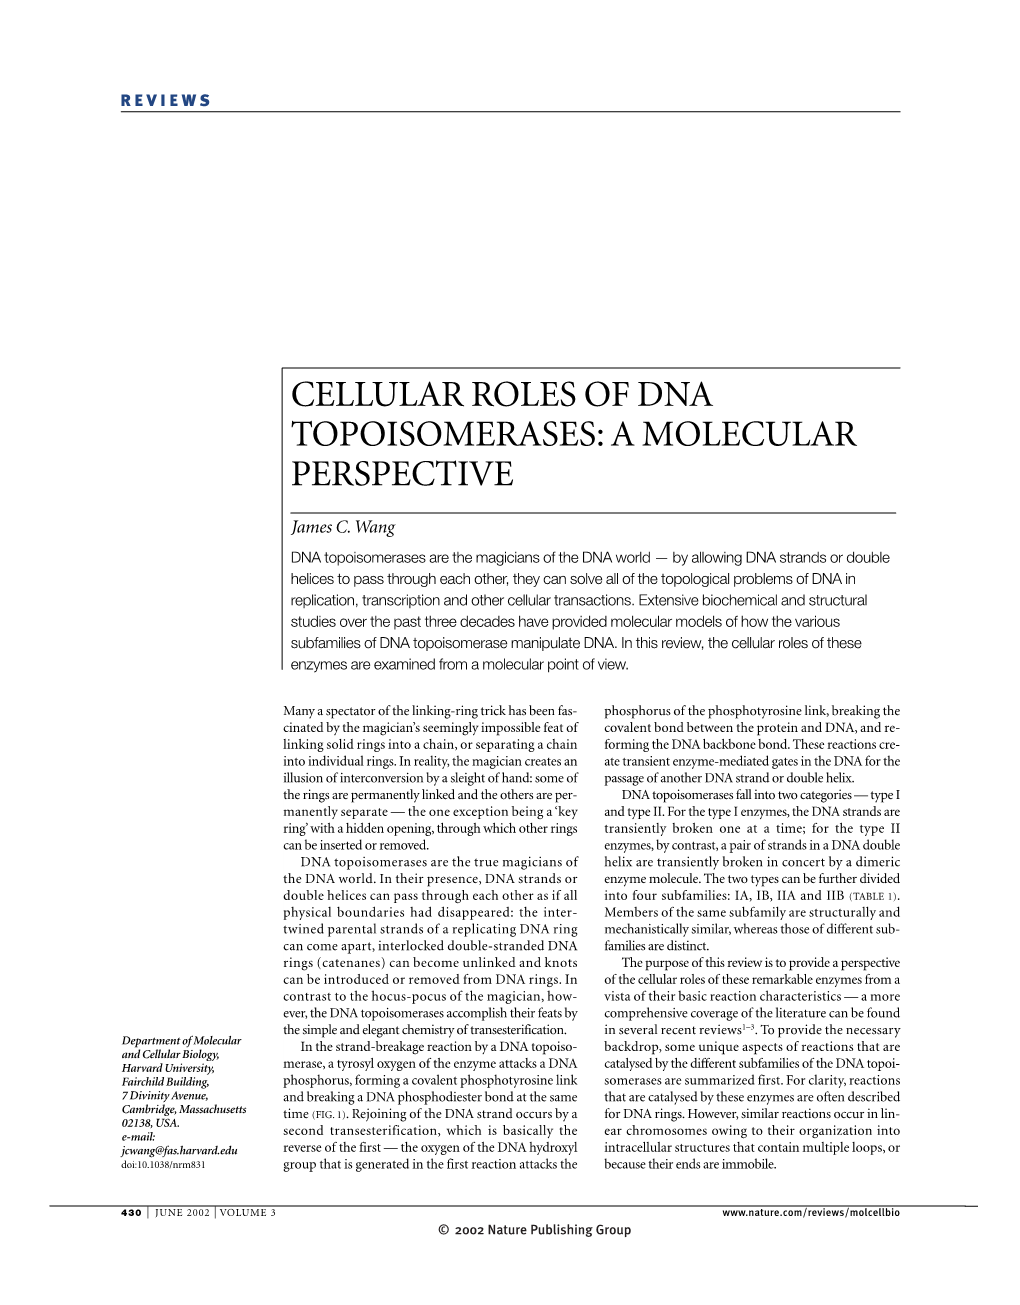 Cellular Roles of Dna Topoisomerases: a Molecular Perspective